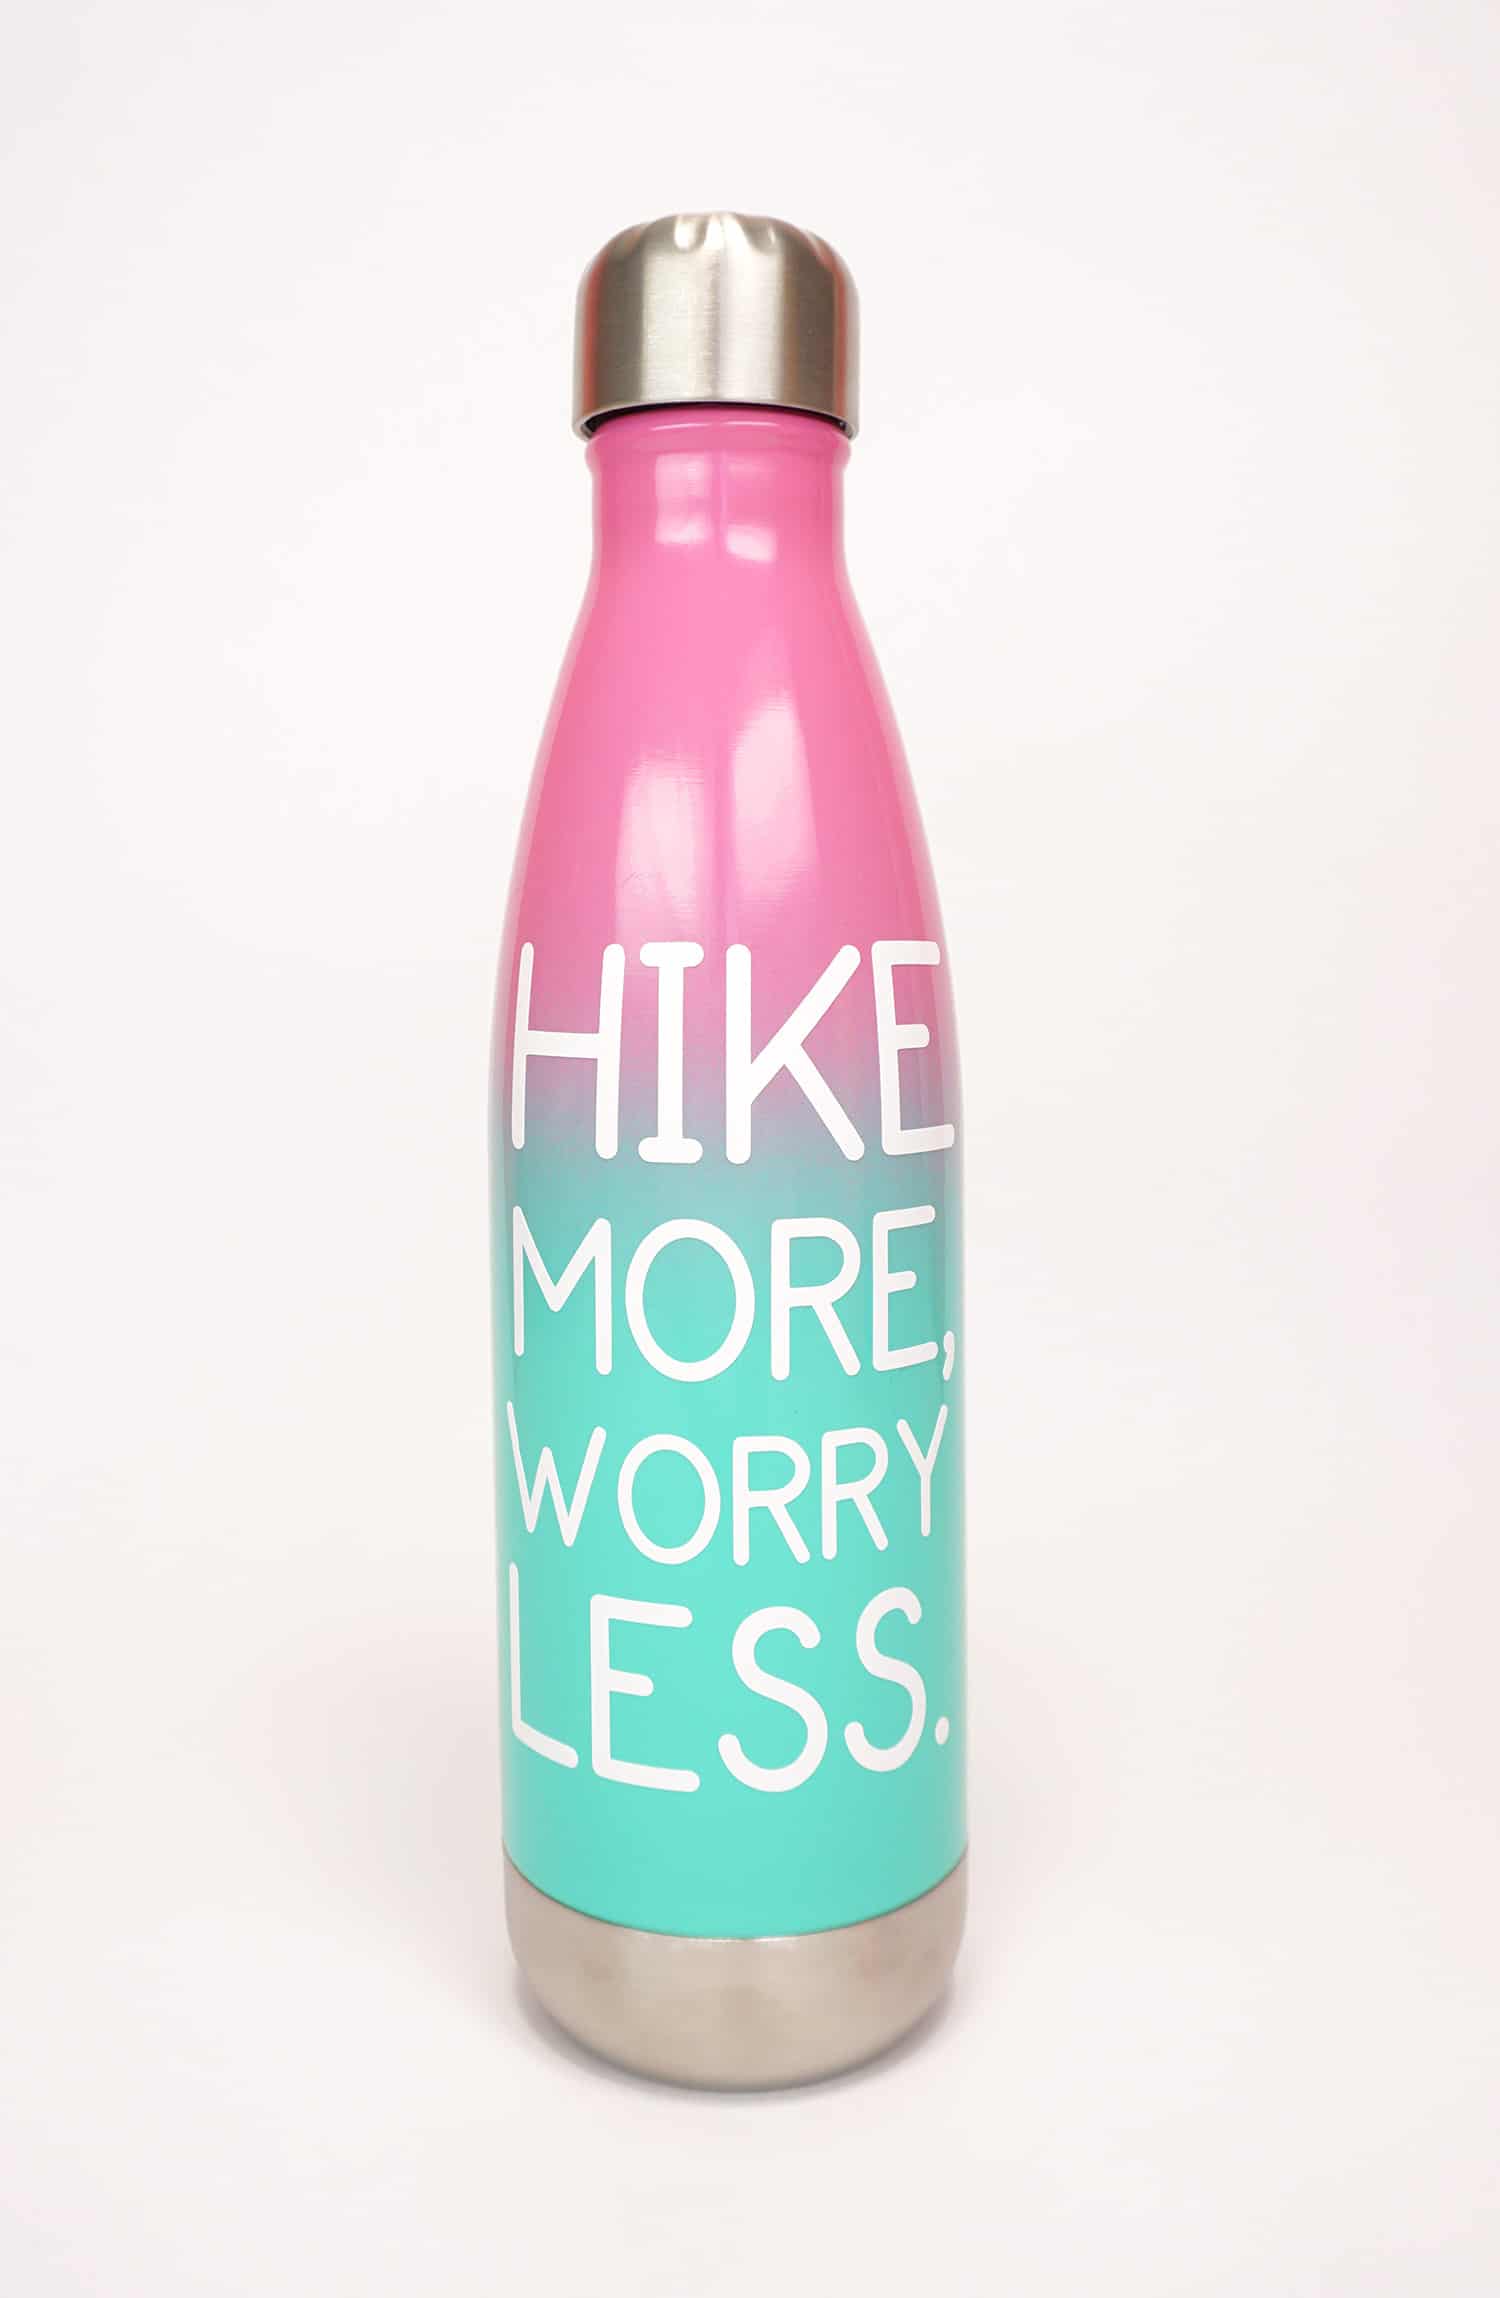 DIY outdoorsy themed water bottles